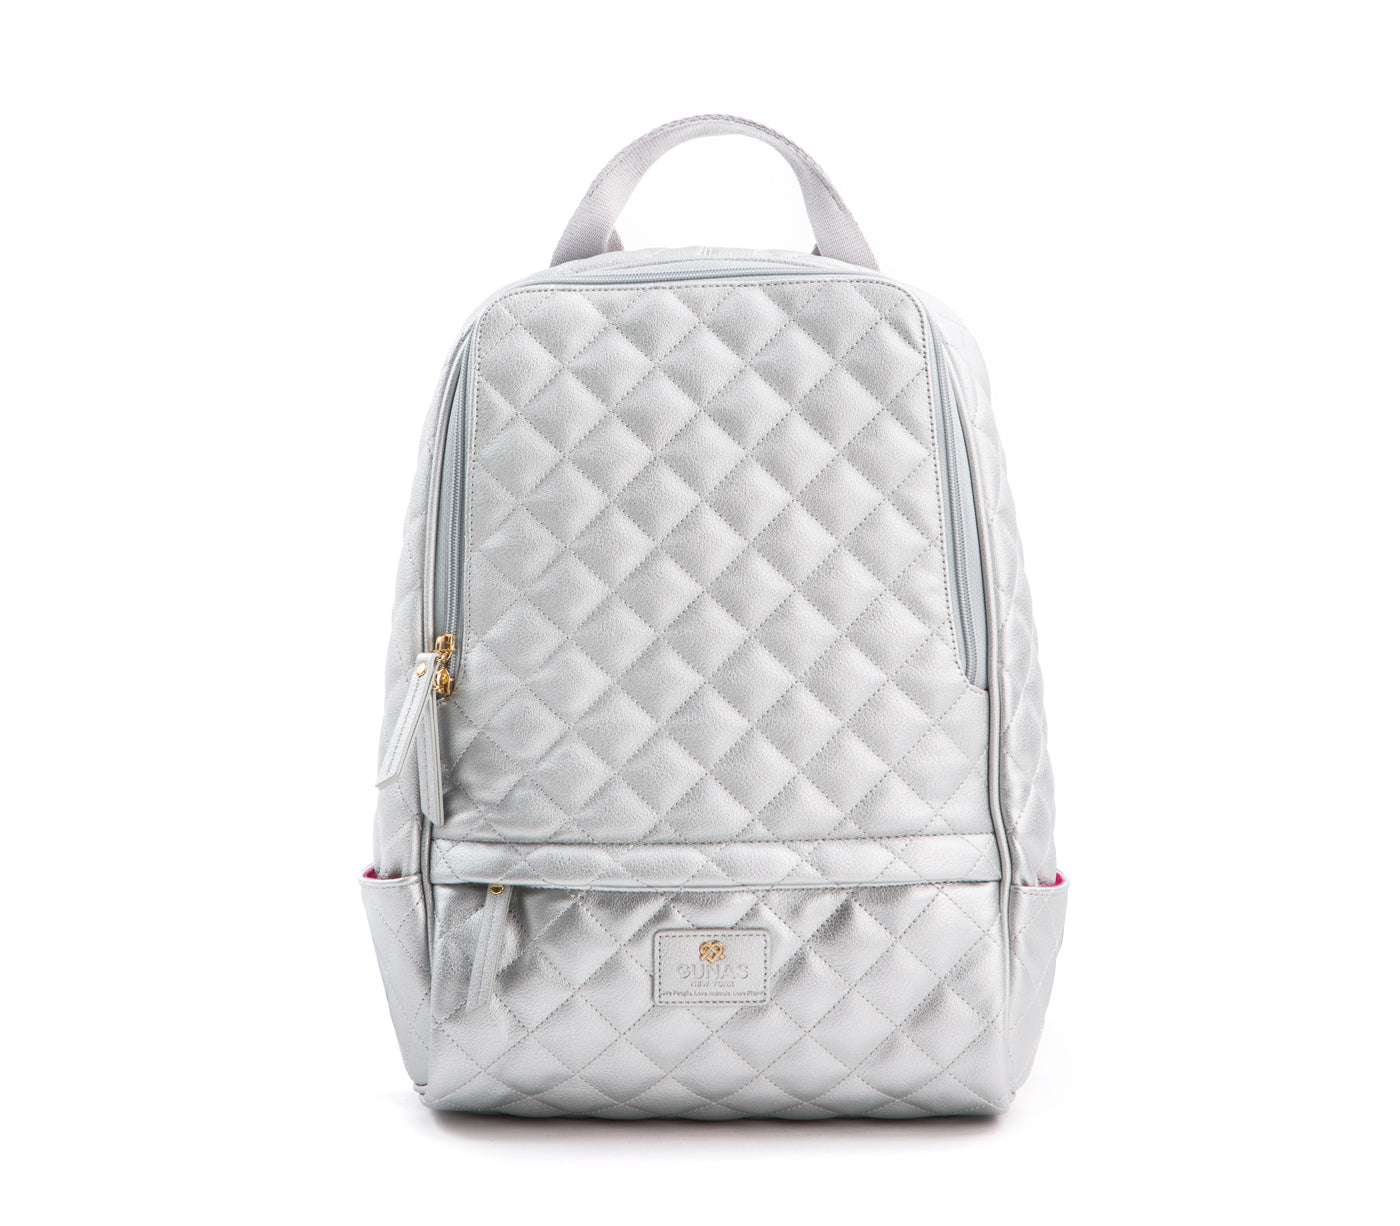 Cougar, Vegan Leather Quilted Backpack